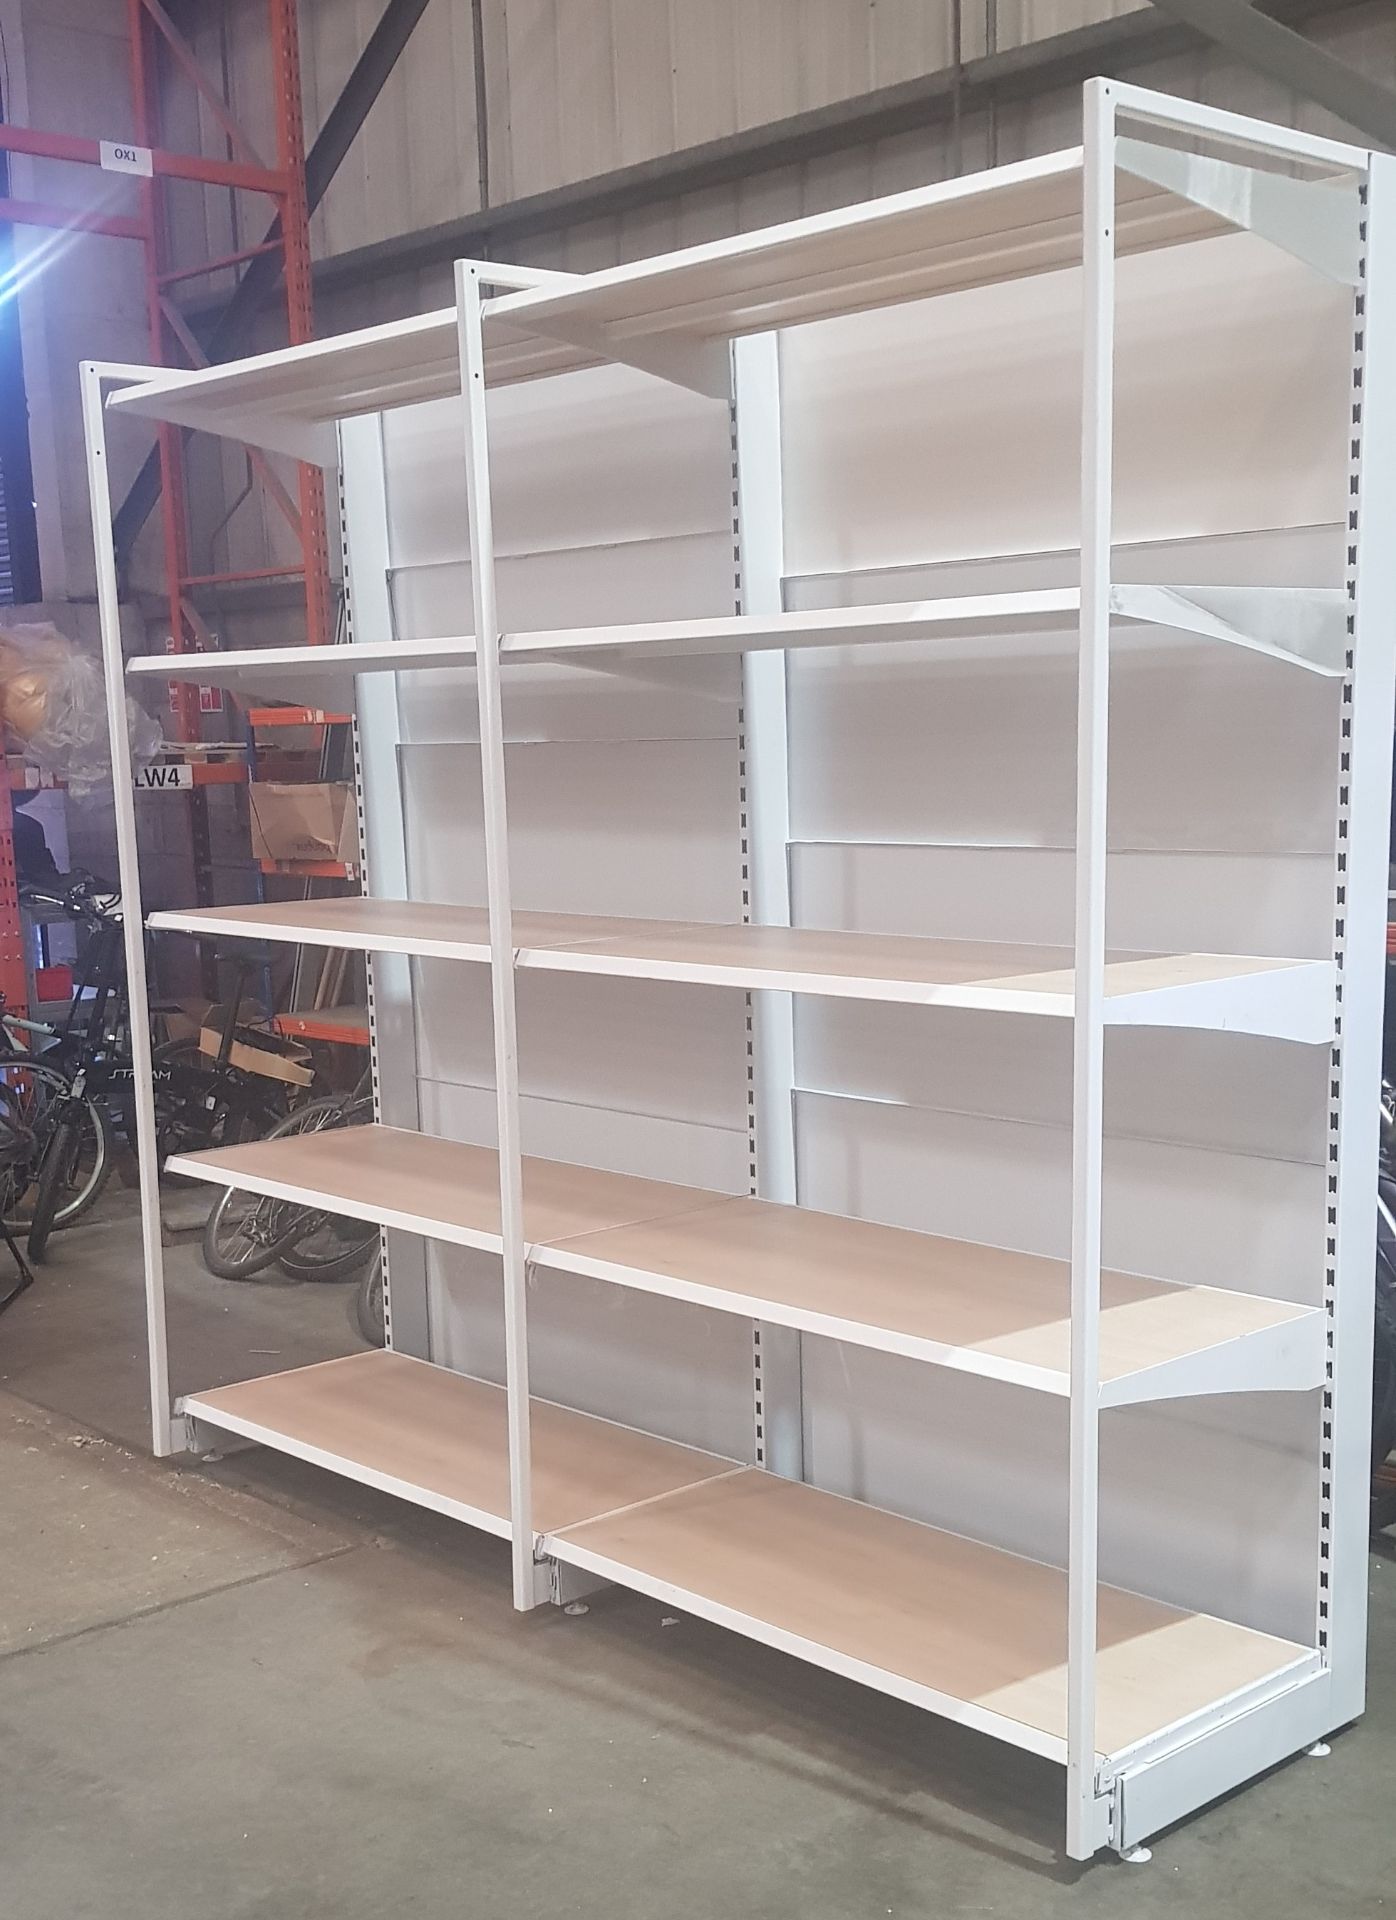 1 X 2 SECTION 5 TIER SHELVING UNIT (3m H x 2.55m W x 0.7m D) (3 UPRIGHT COLUMNS & 10 SHELVES WITH